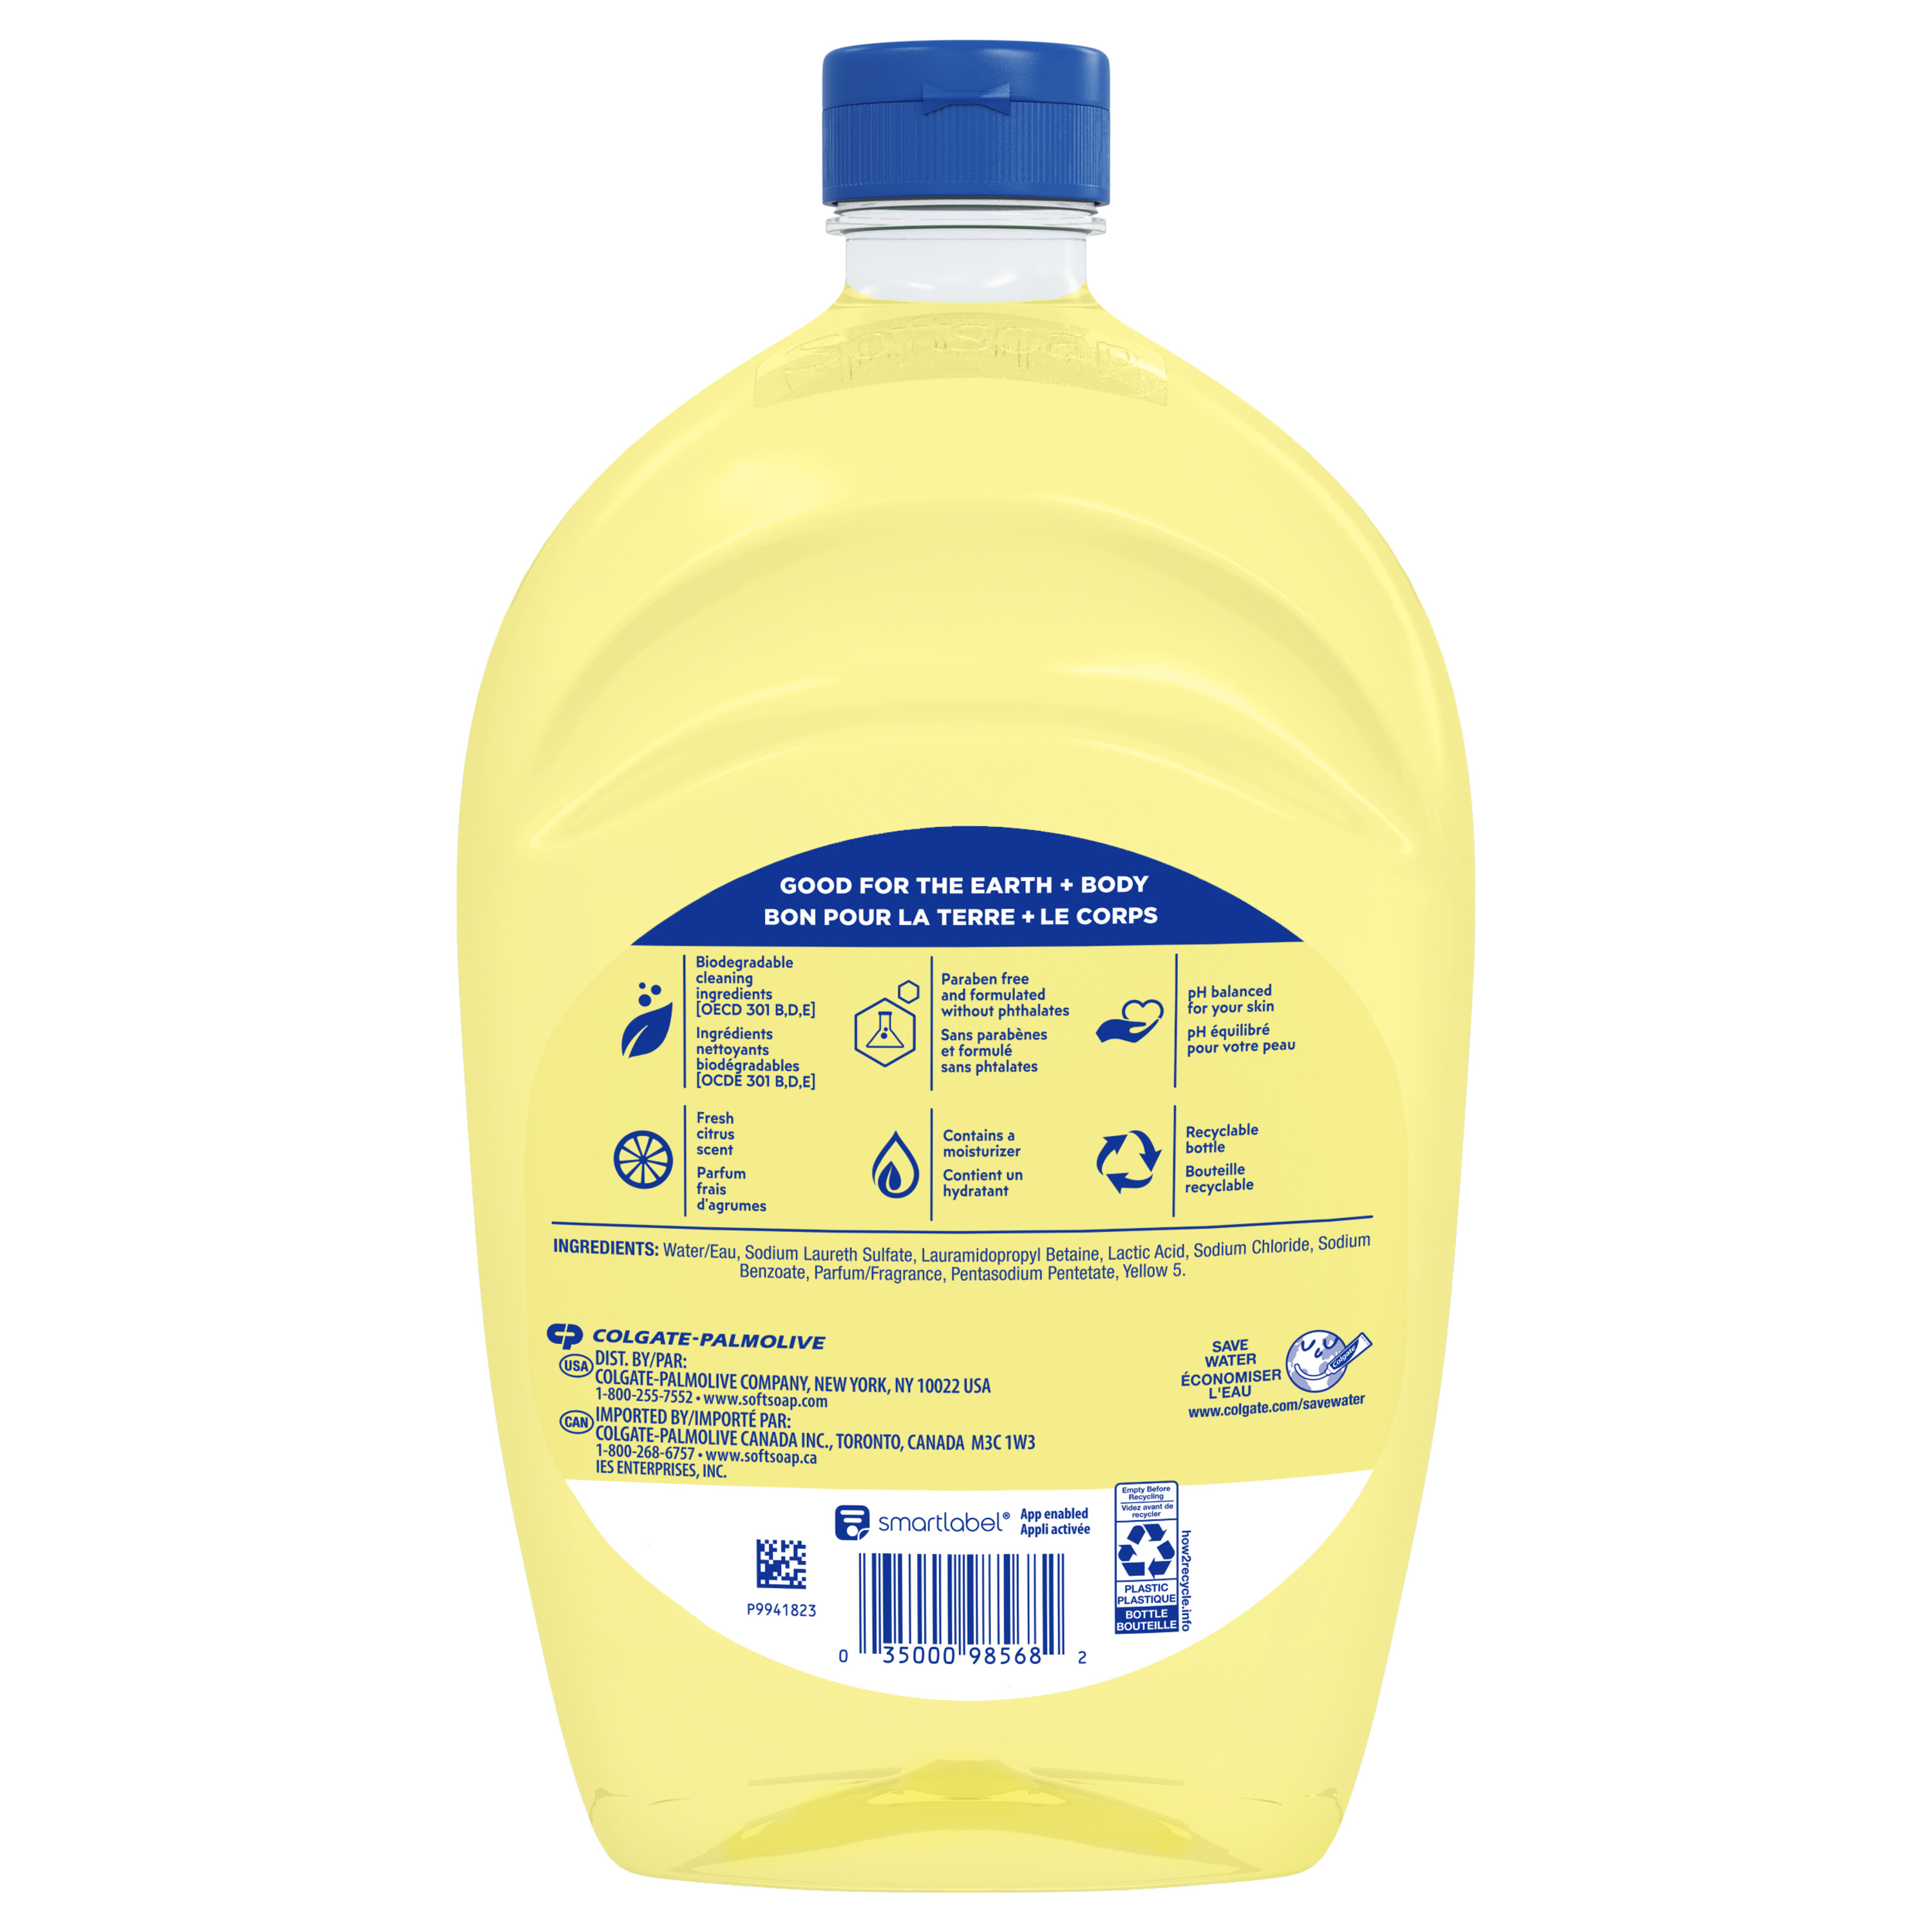 Softsoap Liquid Hand Soap Refill, Refreshing Citrus - 50 Fluid Ounce - image 2 of 5